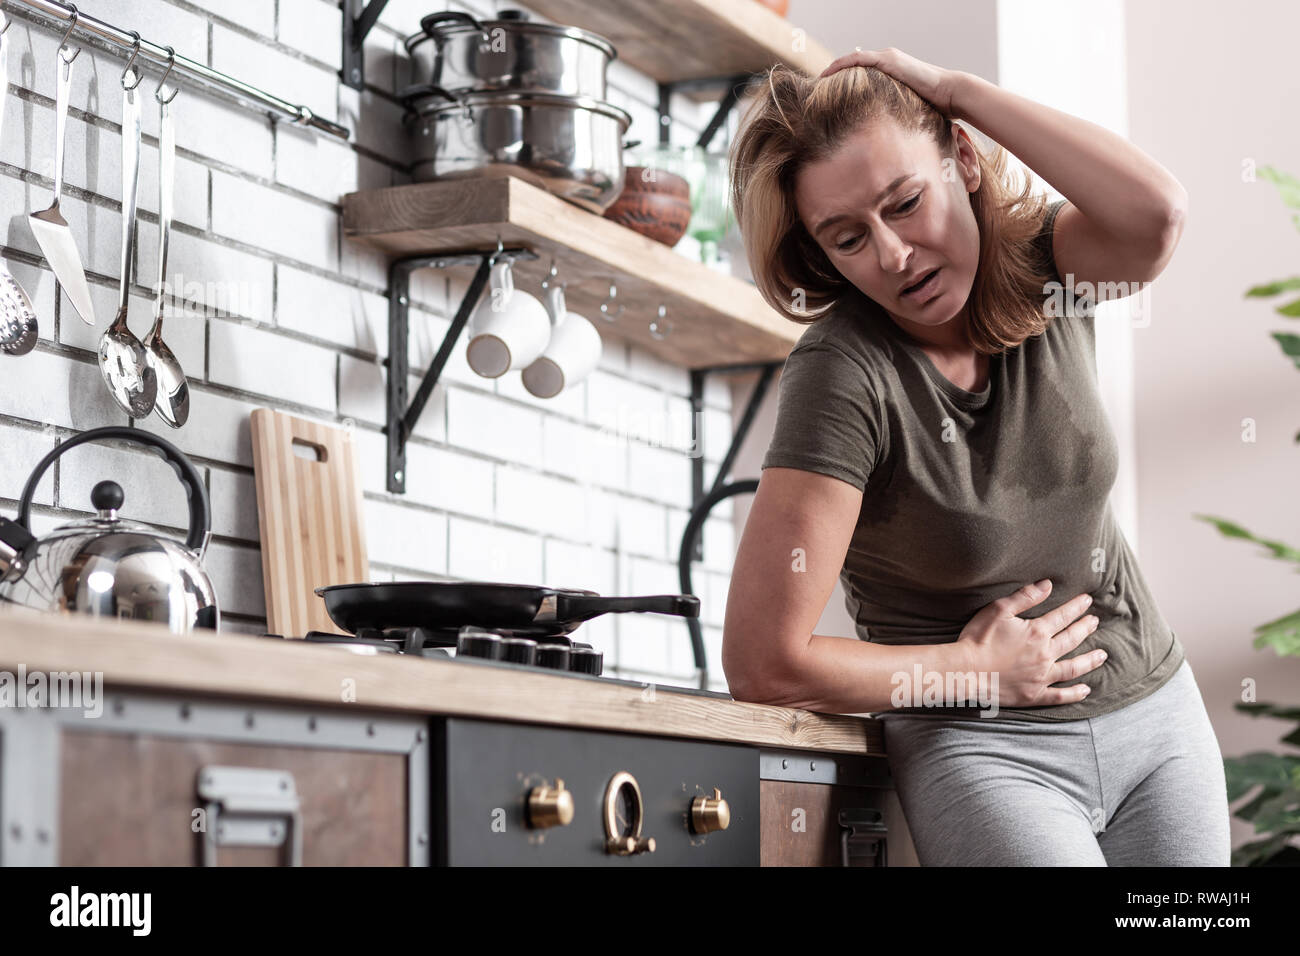 Woman standing near cooker in kitchen suffering from pain Stock Photo